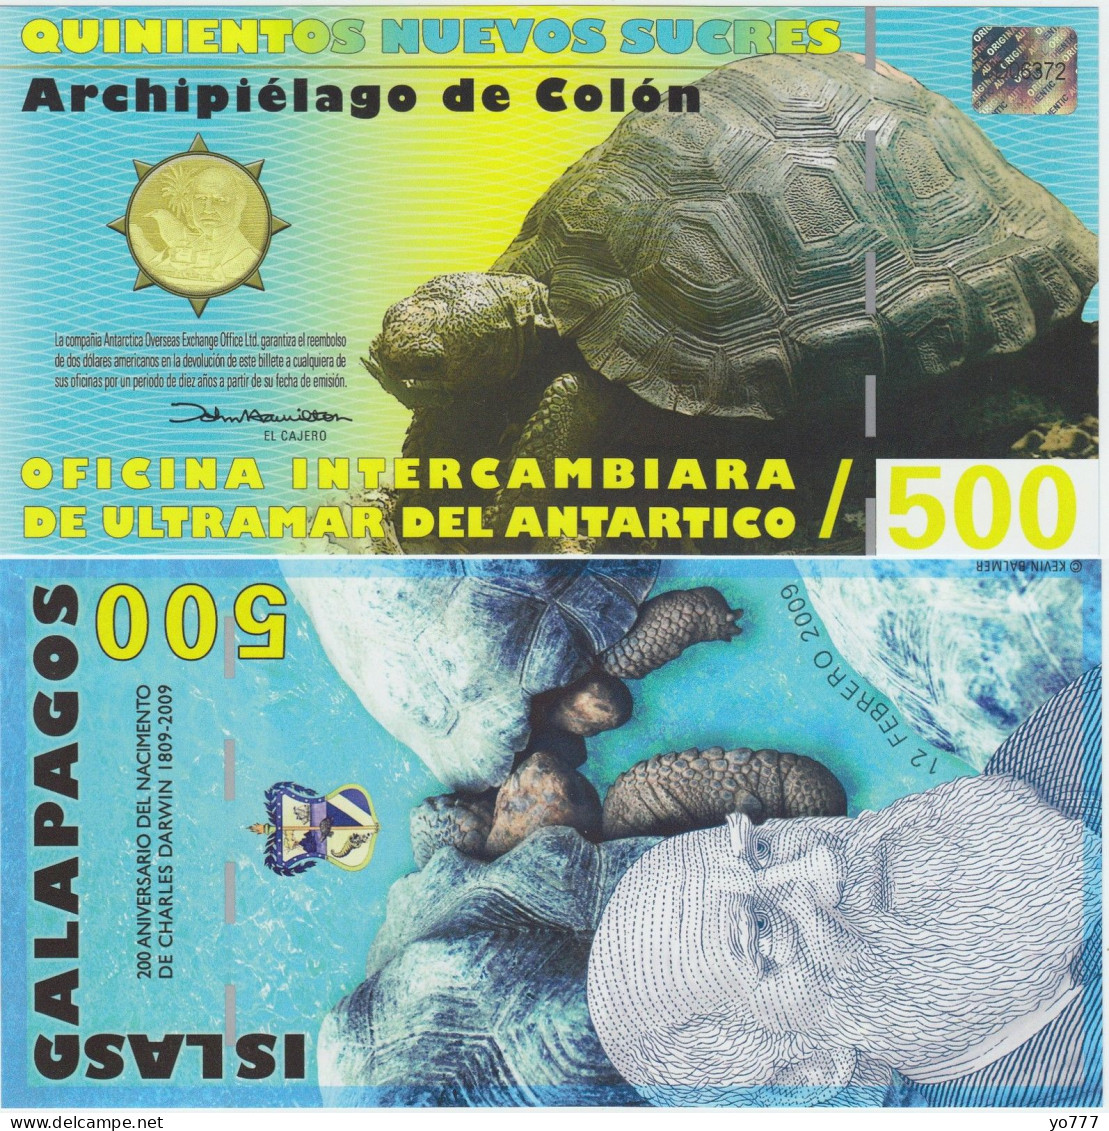 PM GALAPAGOS ISLANDS PAPER MONEY UNC - Other - Oceania